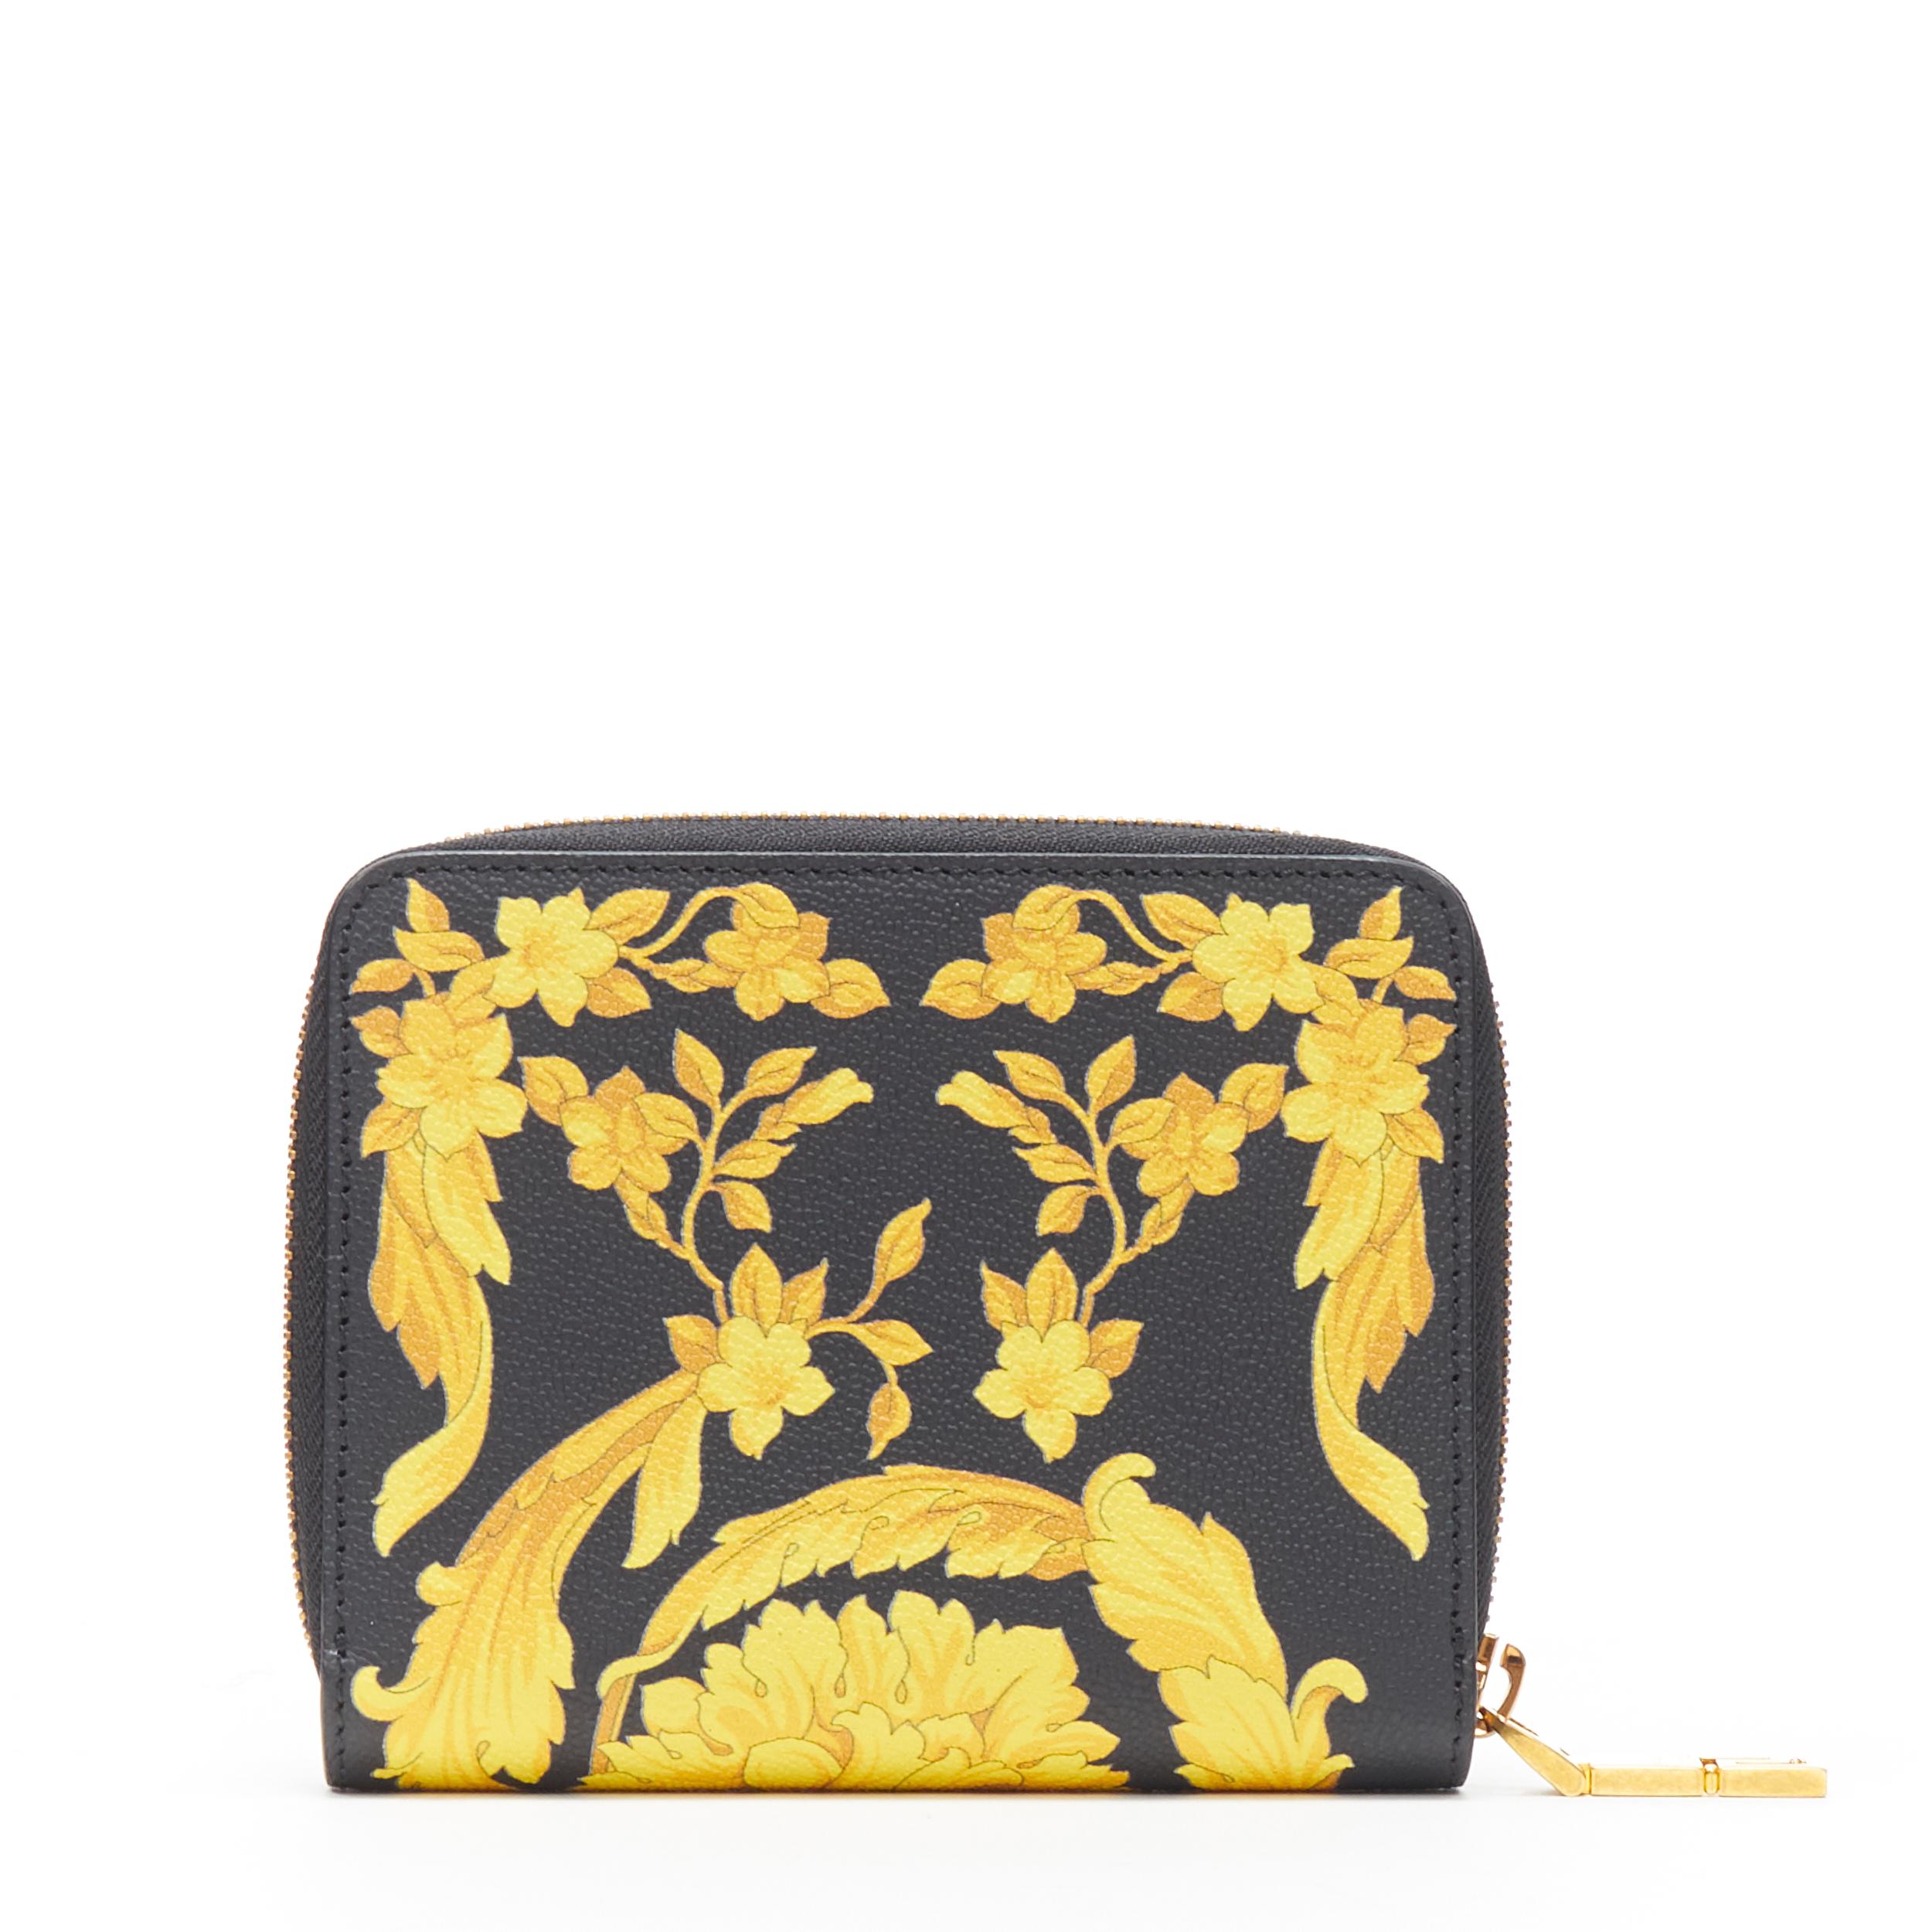 new VERSACE Black Gold Baroque print leather gold Medusa face zip around wallet 
Brand: Versace
Designer: Donatella Versace
Collection: 2019
Model Name / Style: Zip around wallet
Material: Leather
Color: Black, gold
Pattern: Floral
Closure: